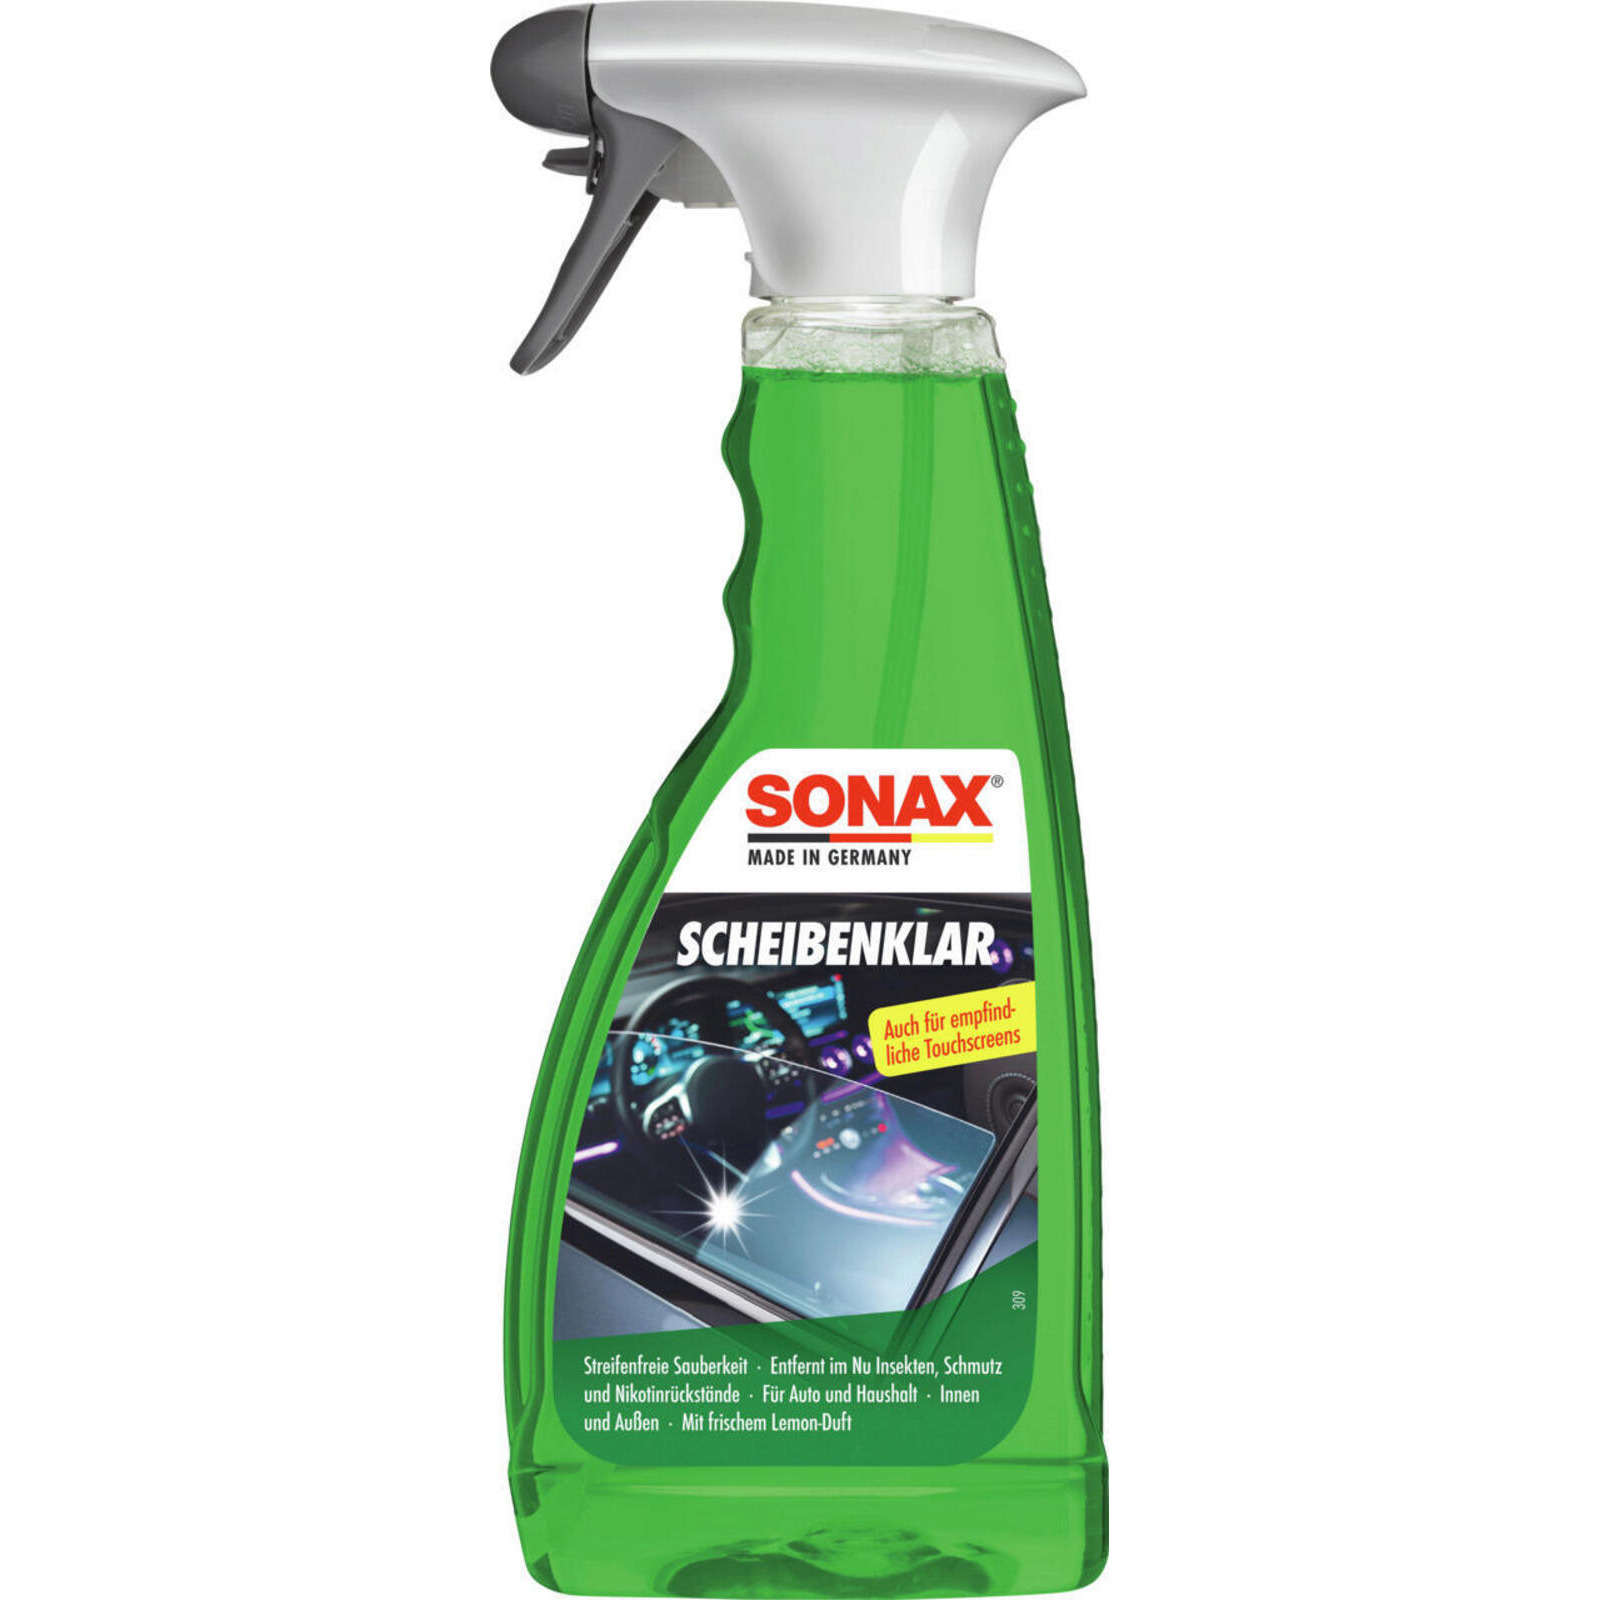 SONAX Window Cleaner Clear glass